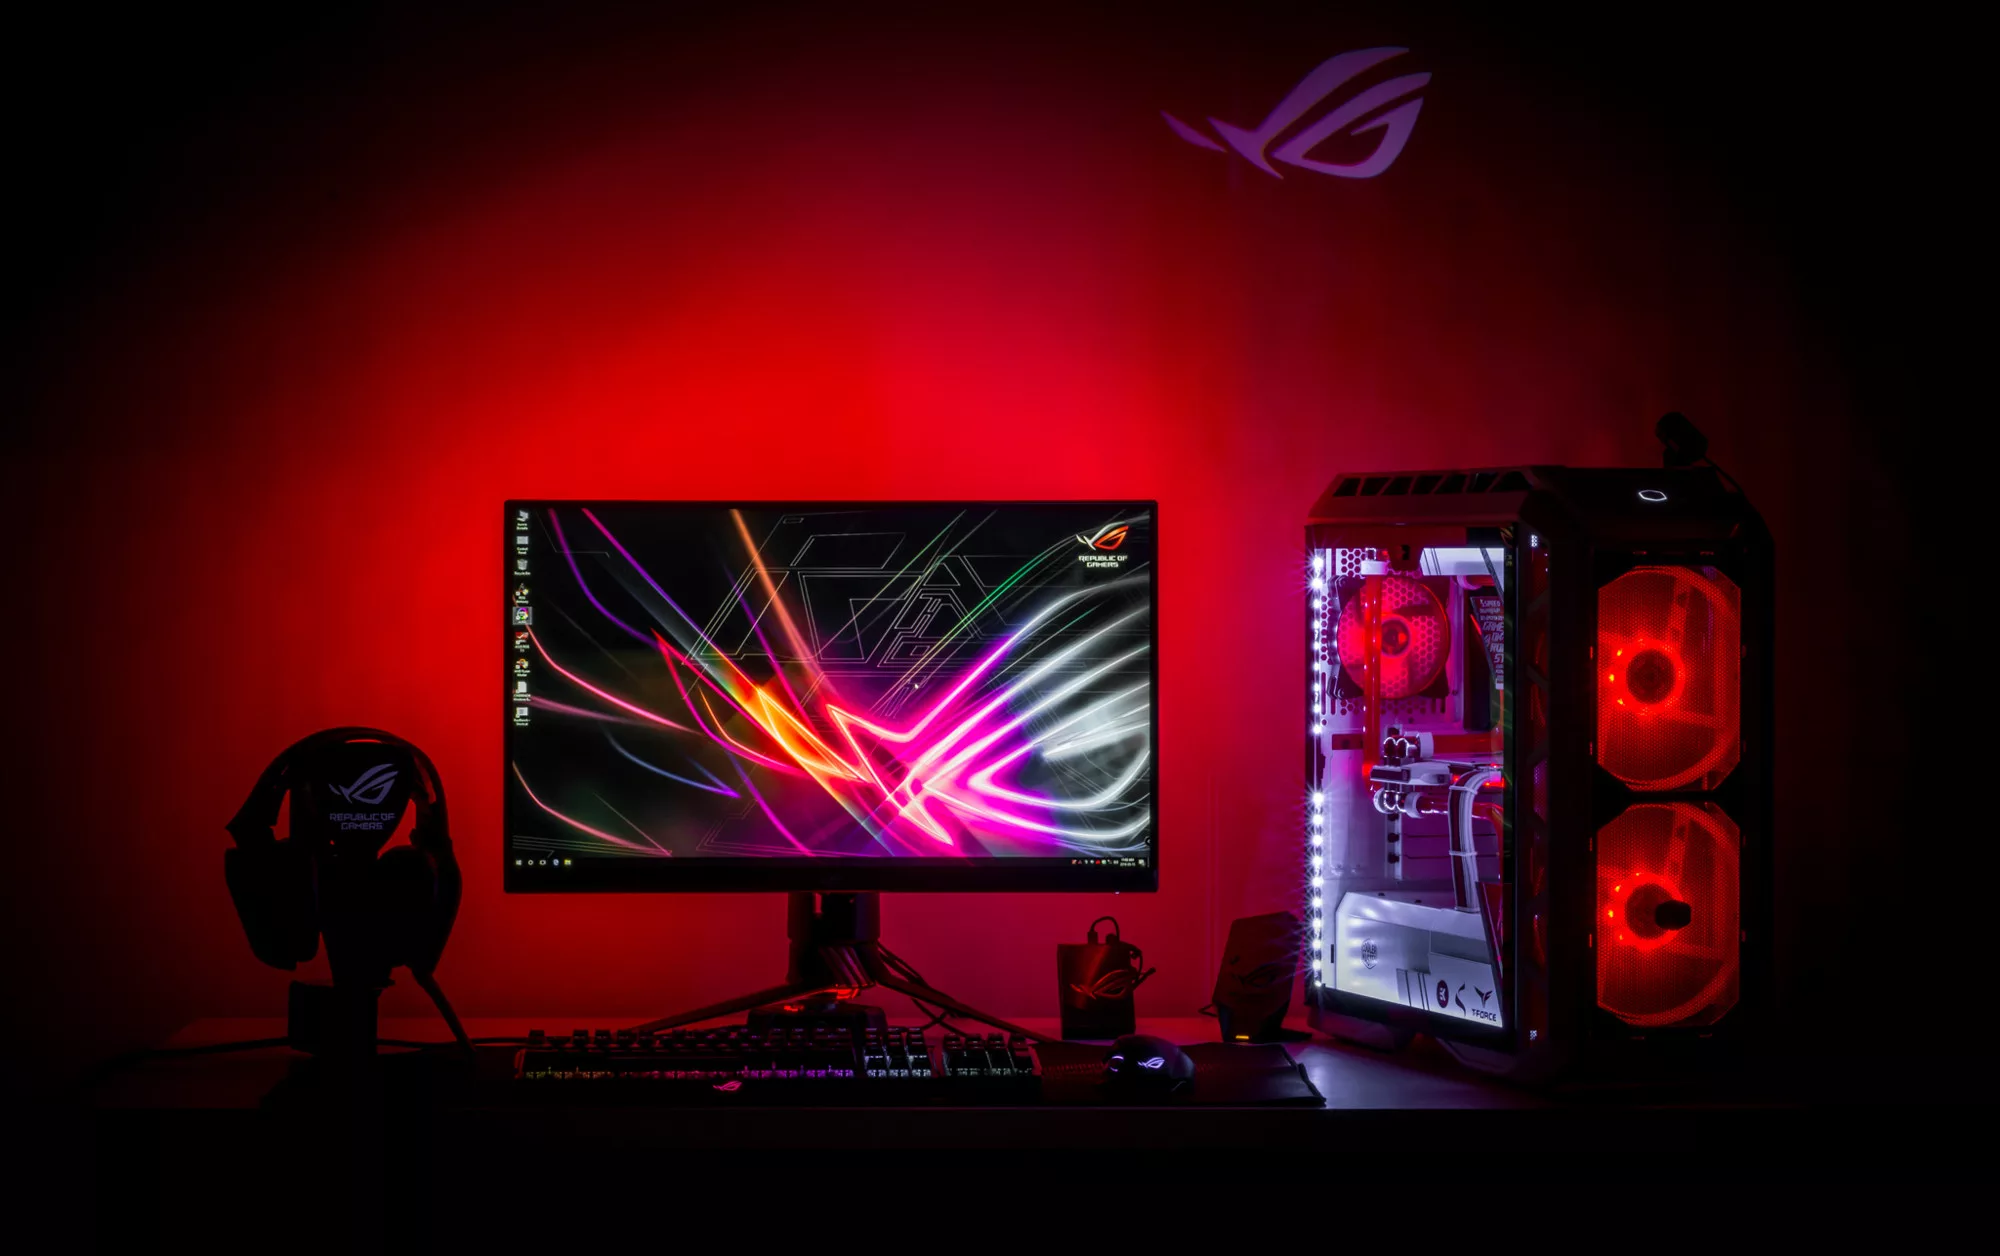 All Aura everything: Inside Snef's Aurora Borealis-inspired build | ROG - Republic of Gamers Global